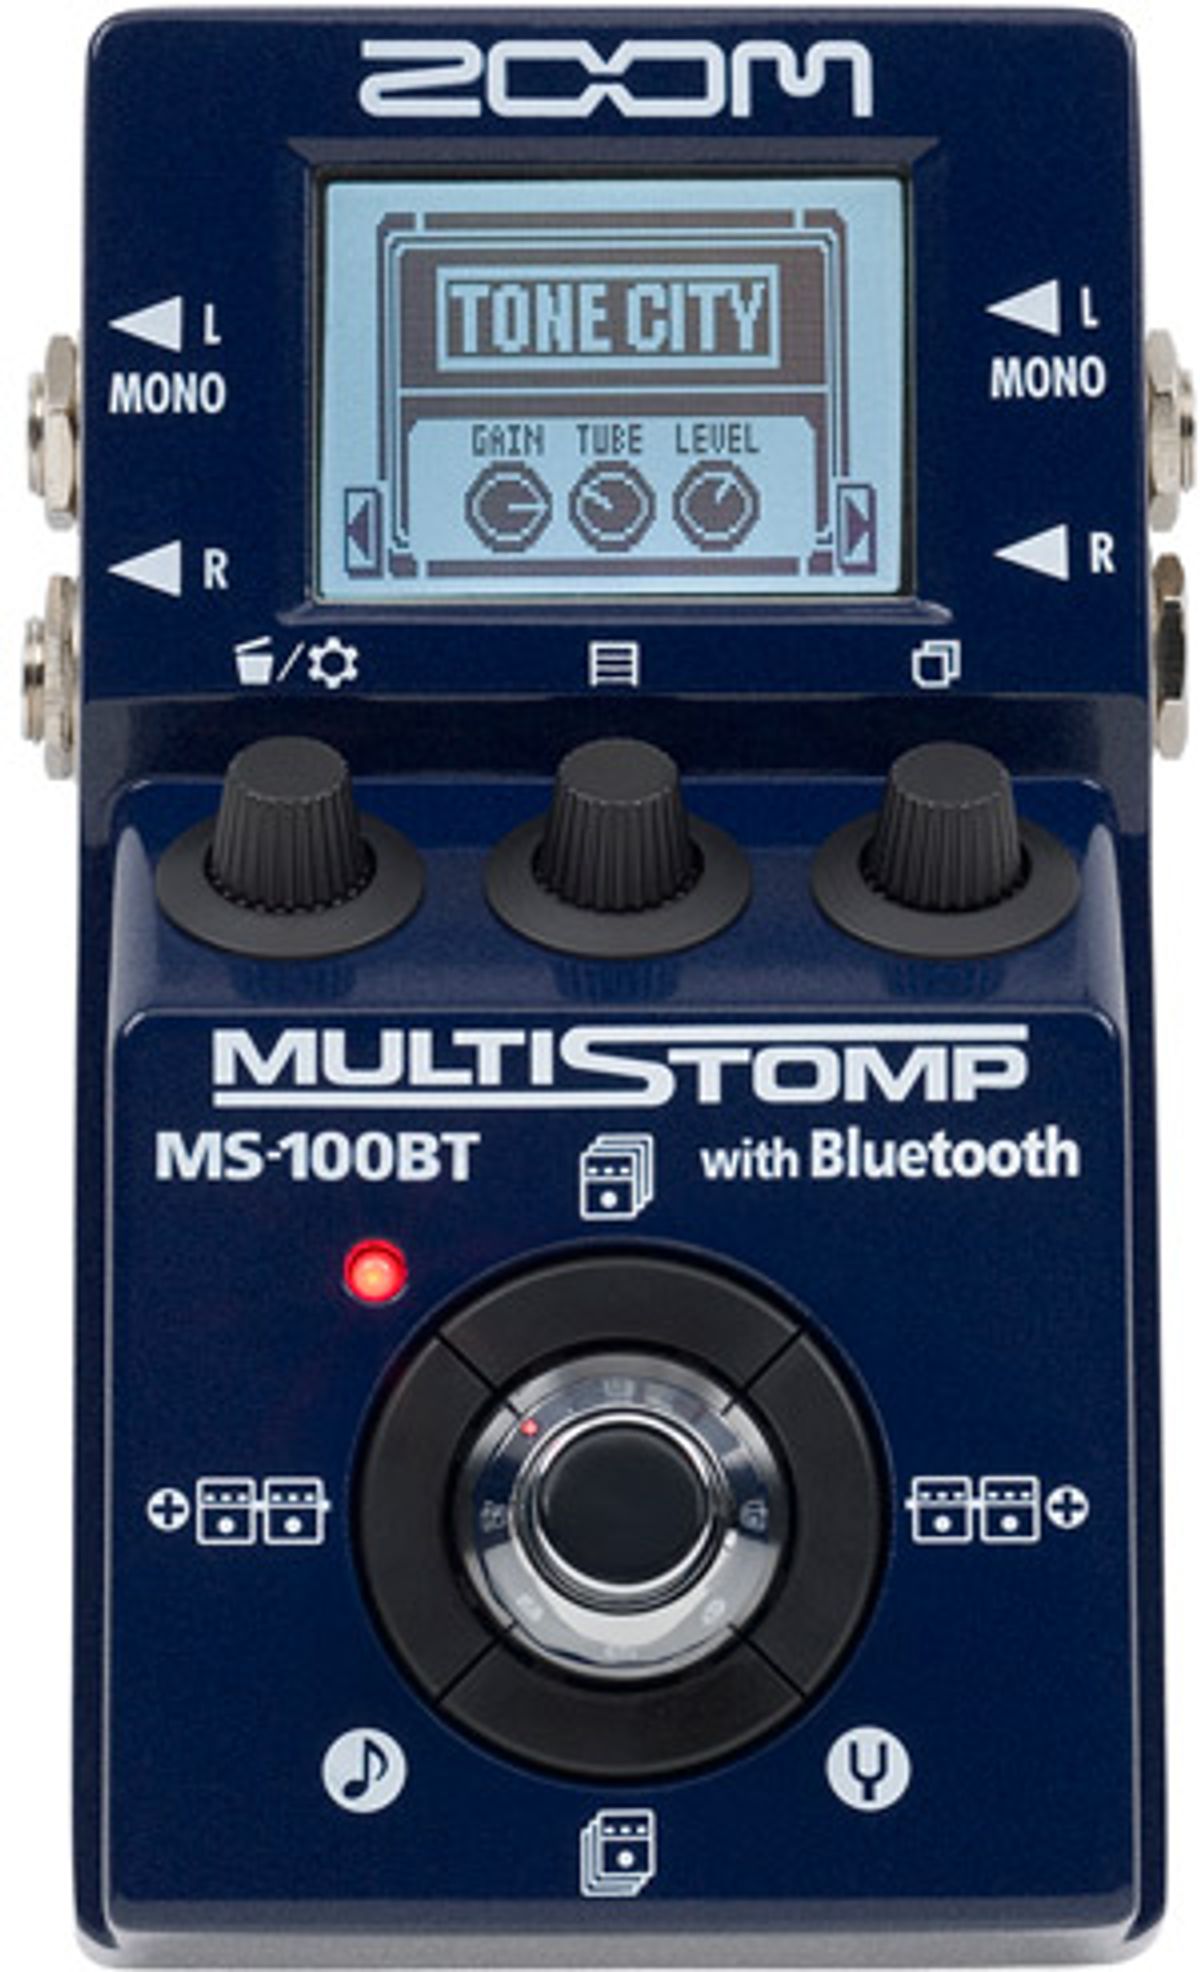 Zoom MS-100BT MultiStomp with Bluetooth Pedal Review - Premier Guitar